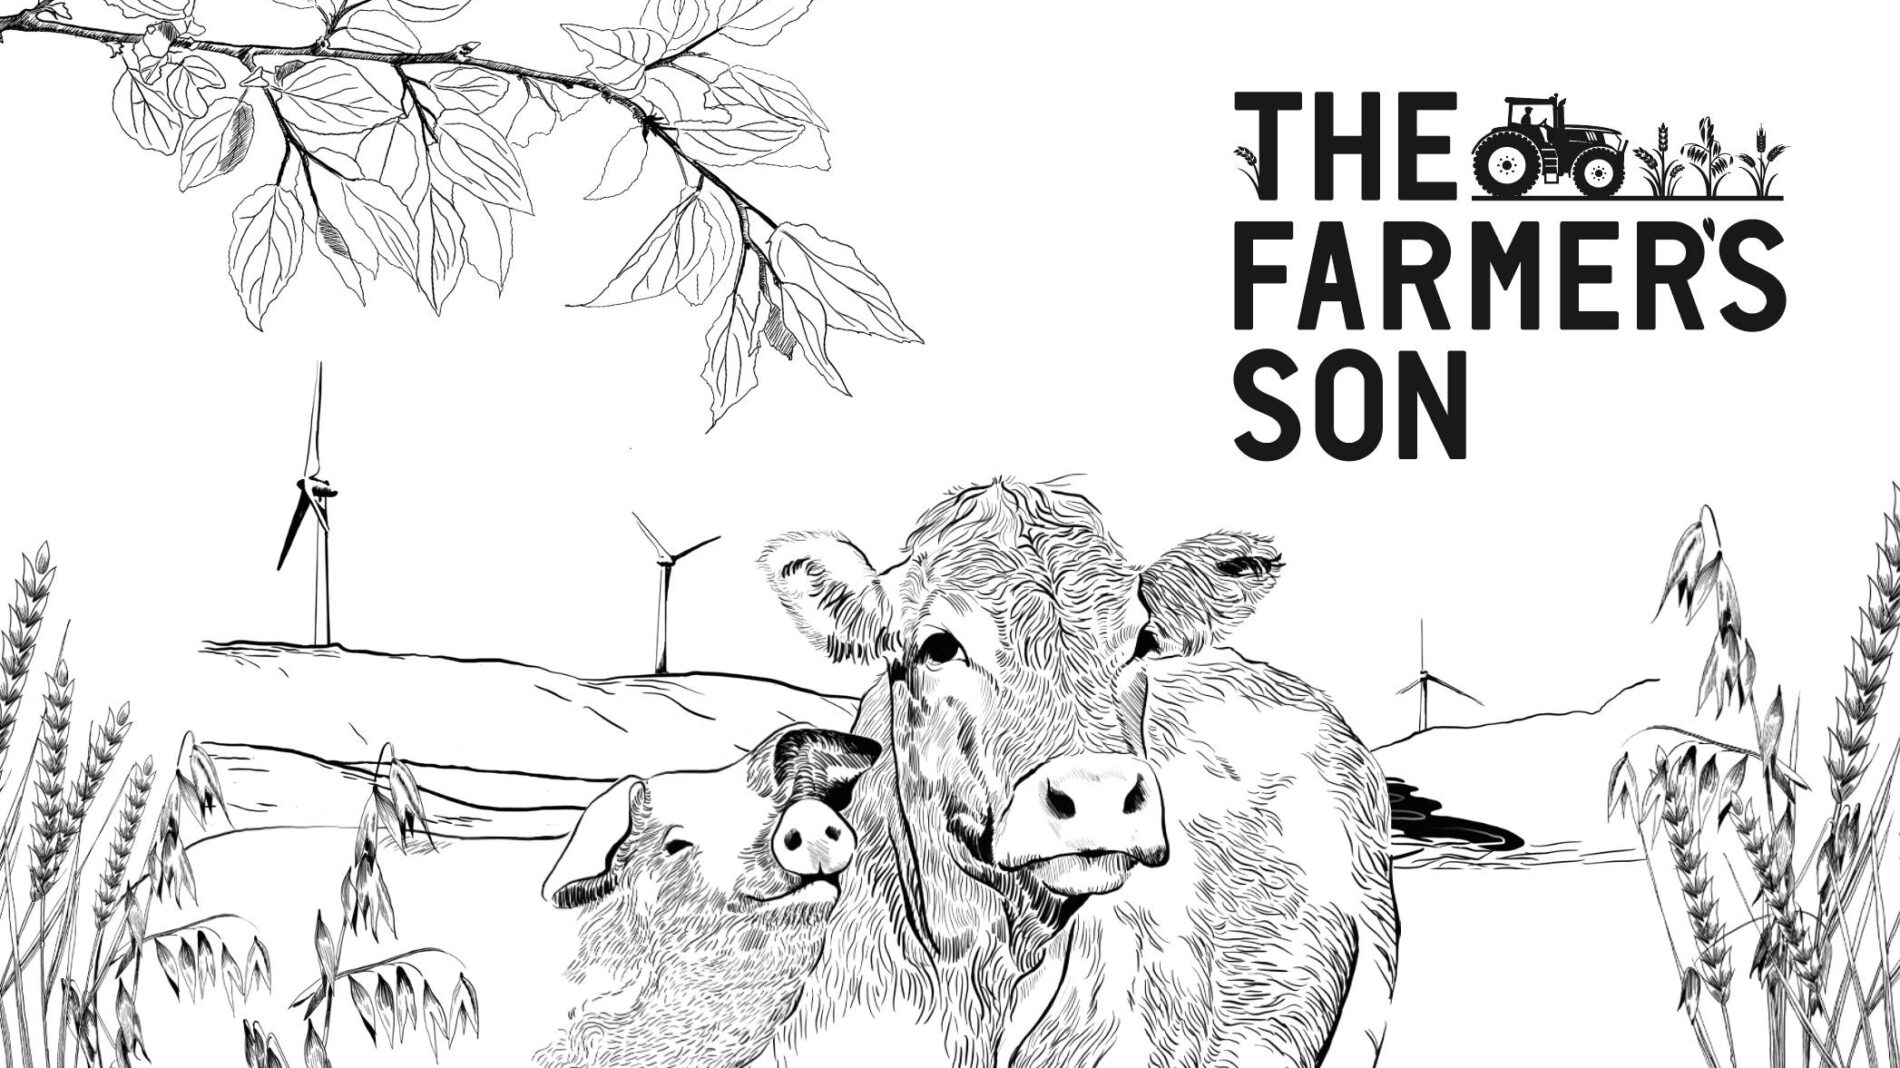 The Farmer's Son illustration of cows and pigs on the farm